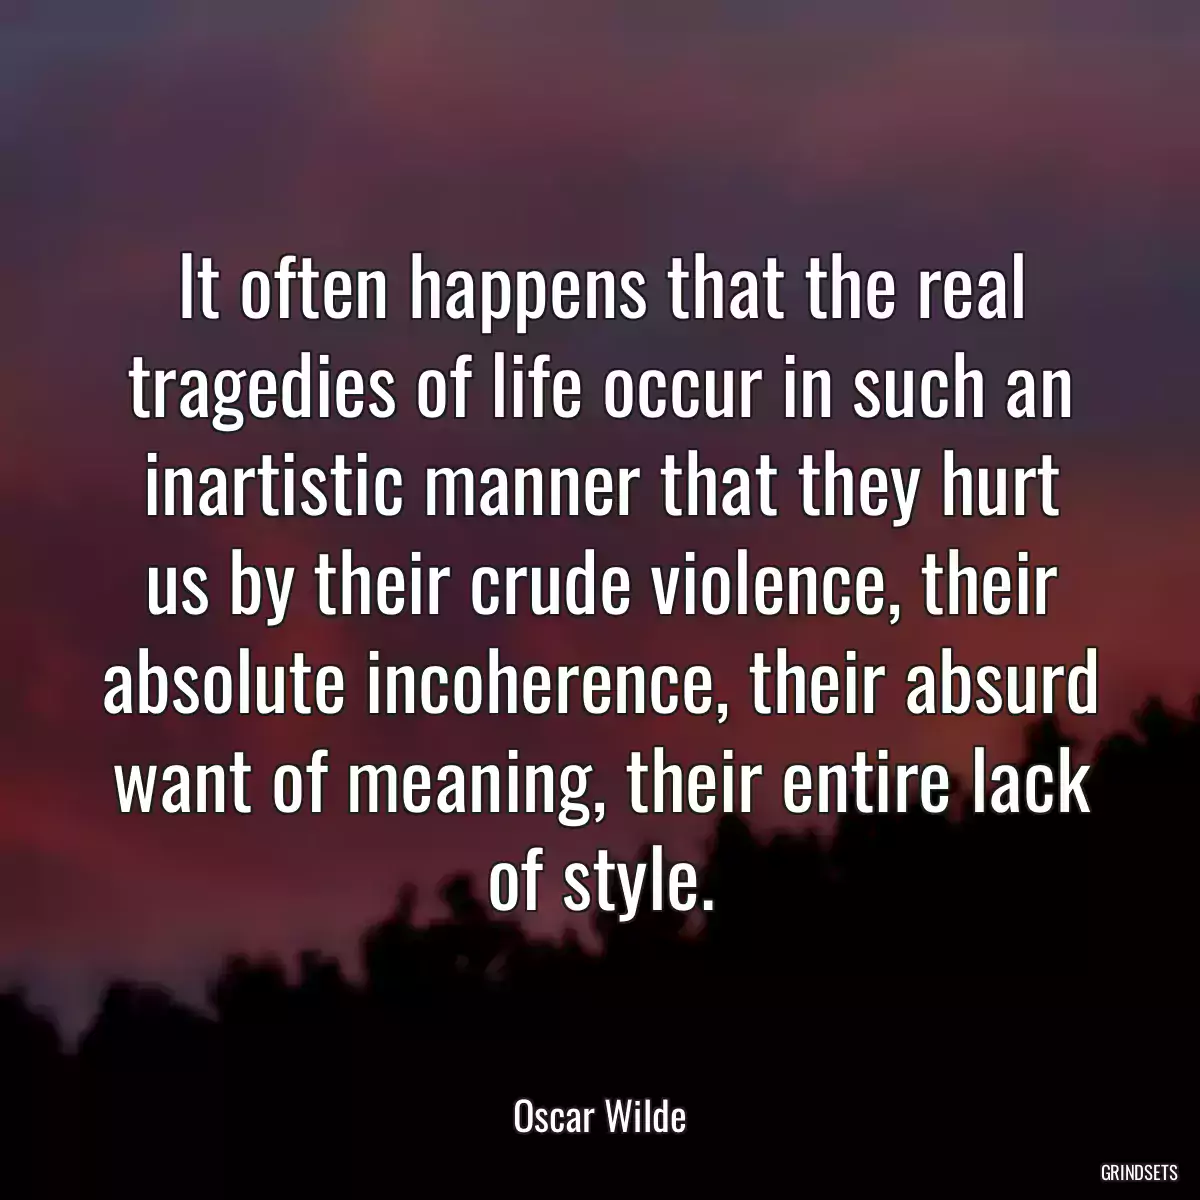 It often happens that the real tragedies of life occur in such an inartistic manner that they hurt us by their crude violence, their absolute incoherence, their absurd want of meaning, their entire lack of style.